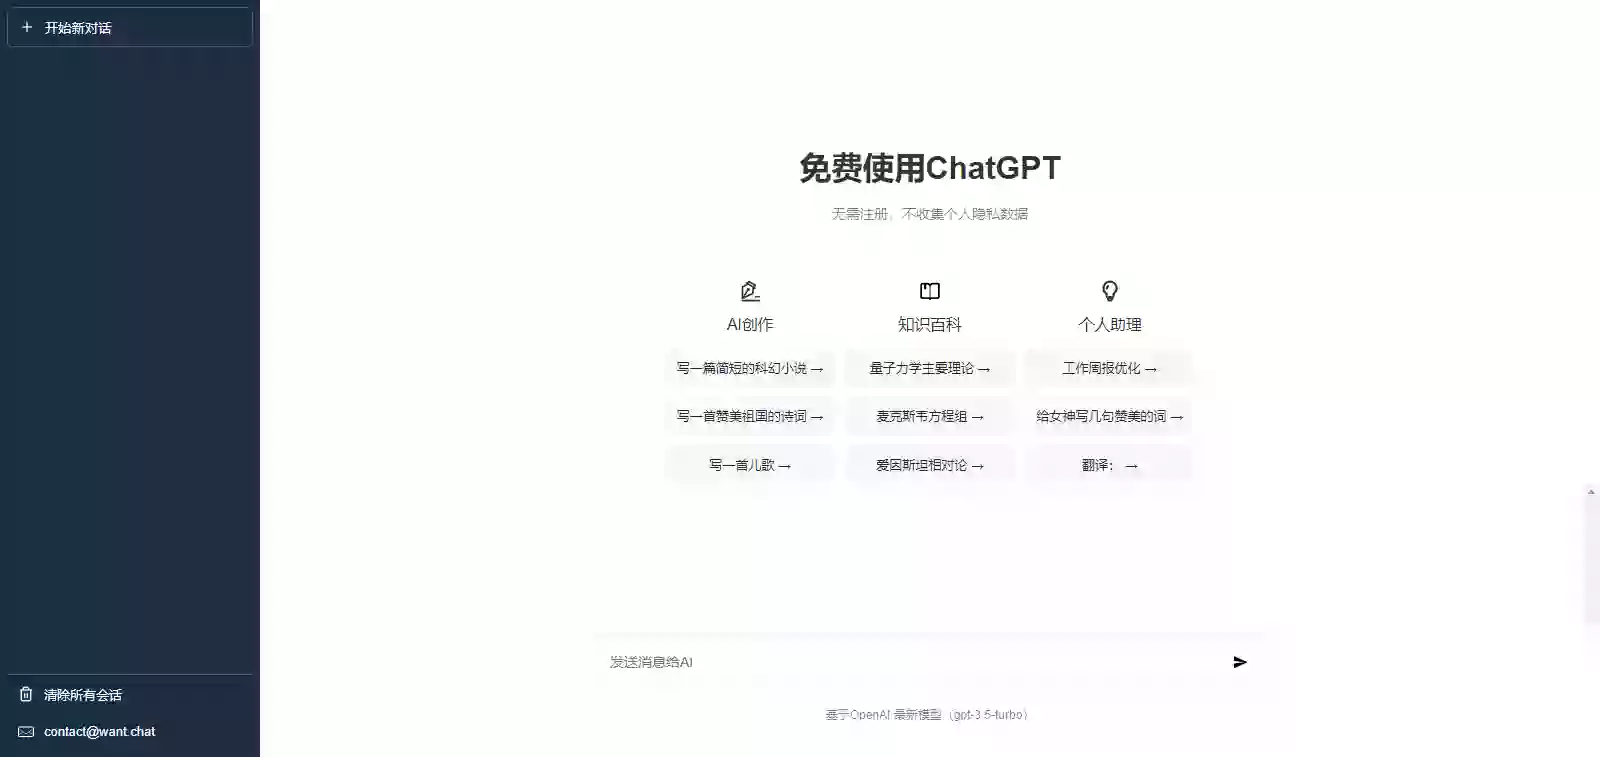 Want Chat免費使用ChatGPT